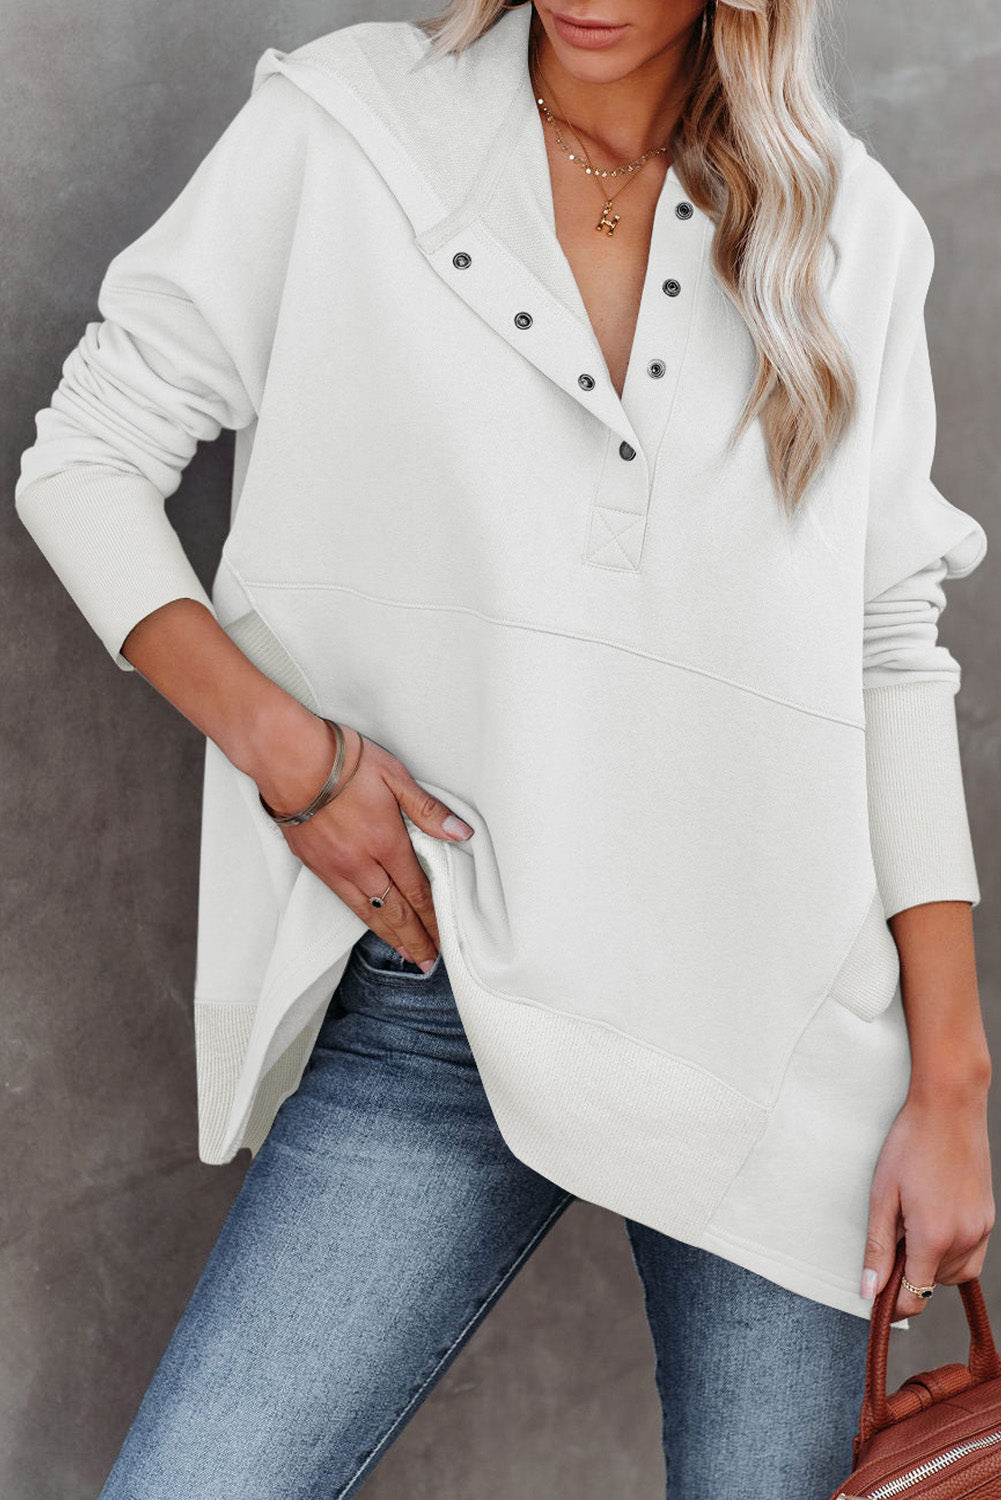 LC25311926-1-S, LC25311926-1-M, LC25311926-1-L, LC25311926-1-XL, LC25311926-1-2XL, White Batwing Sleeve Pocketed Henley Hoodie